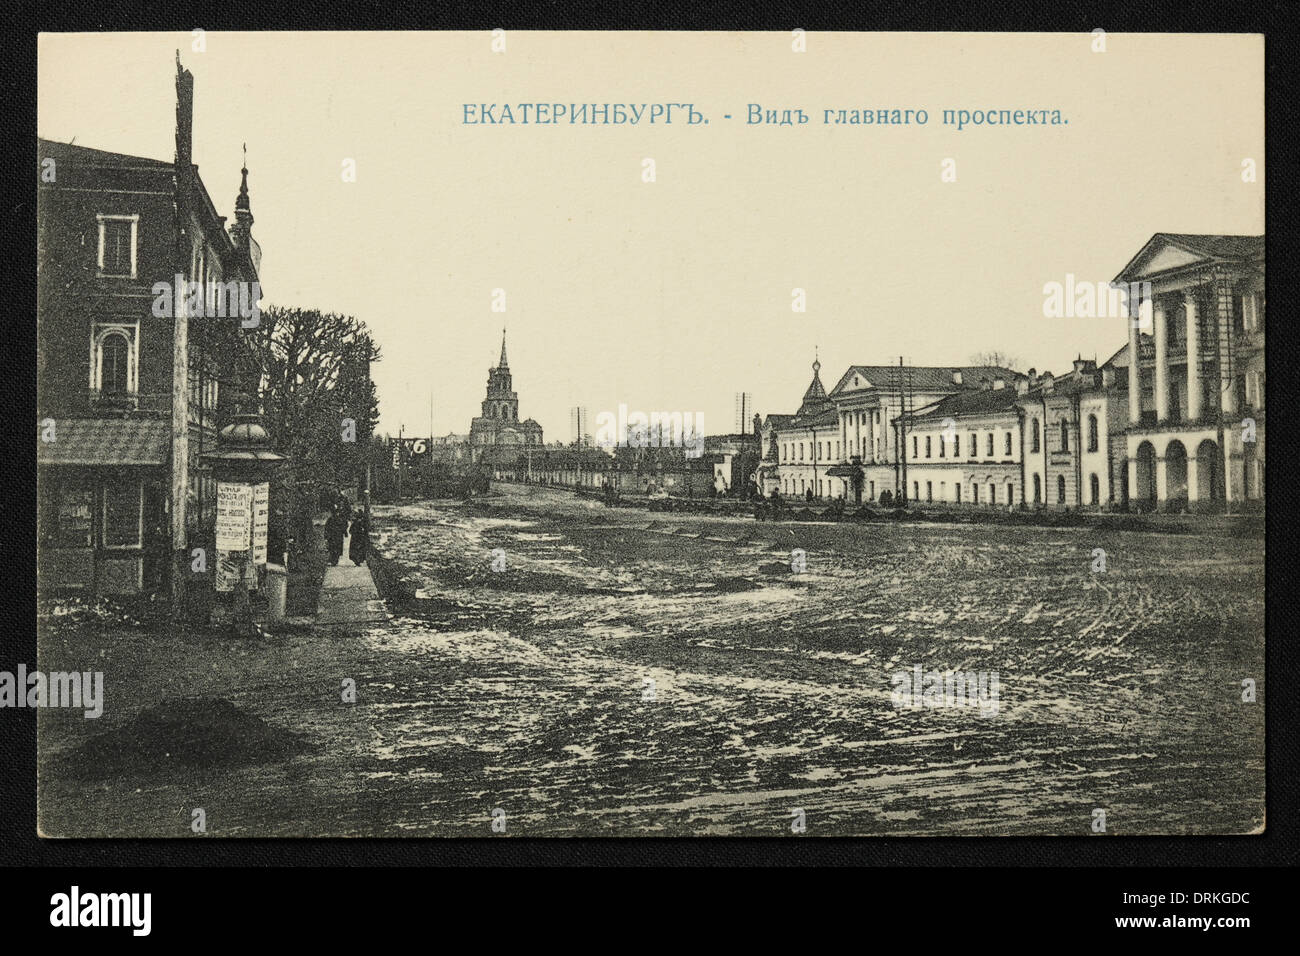 Saint Catherine's Cathedral in the Main Avenue in Yekaterinburg, Russian Empire. Black and white vintage photograph by Russian photographer Nikolai Vvedensky dated from the beginning of the 20th century issued in the Russian vintage postcard published by M.S. Semkov, Yekaterinburg. Text in Russian: Yekaterinburg. View of Glavny Prospekt Avenue (Main Avenue). St Catherine's Cathedral is seen in the background. The cathedral was destroyed by the Bolsheviks in the 1930s. Courtesy of the Azoor Postcard Collection. Stock Photo